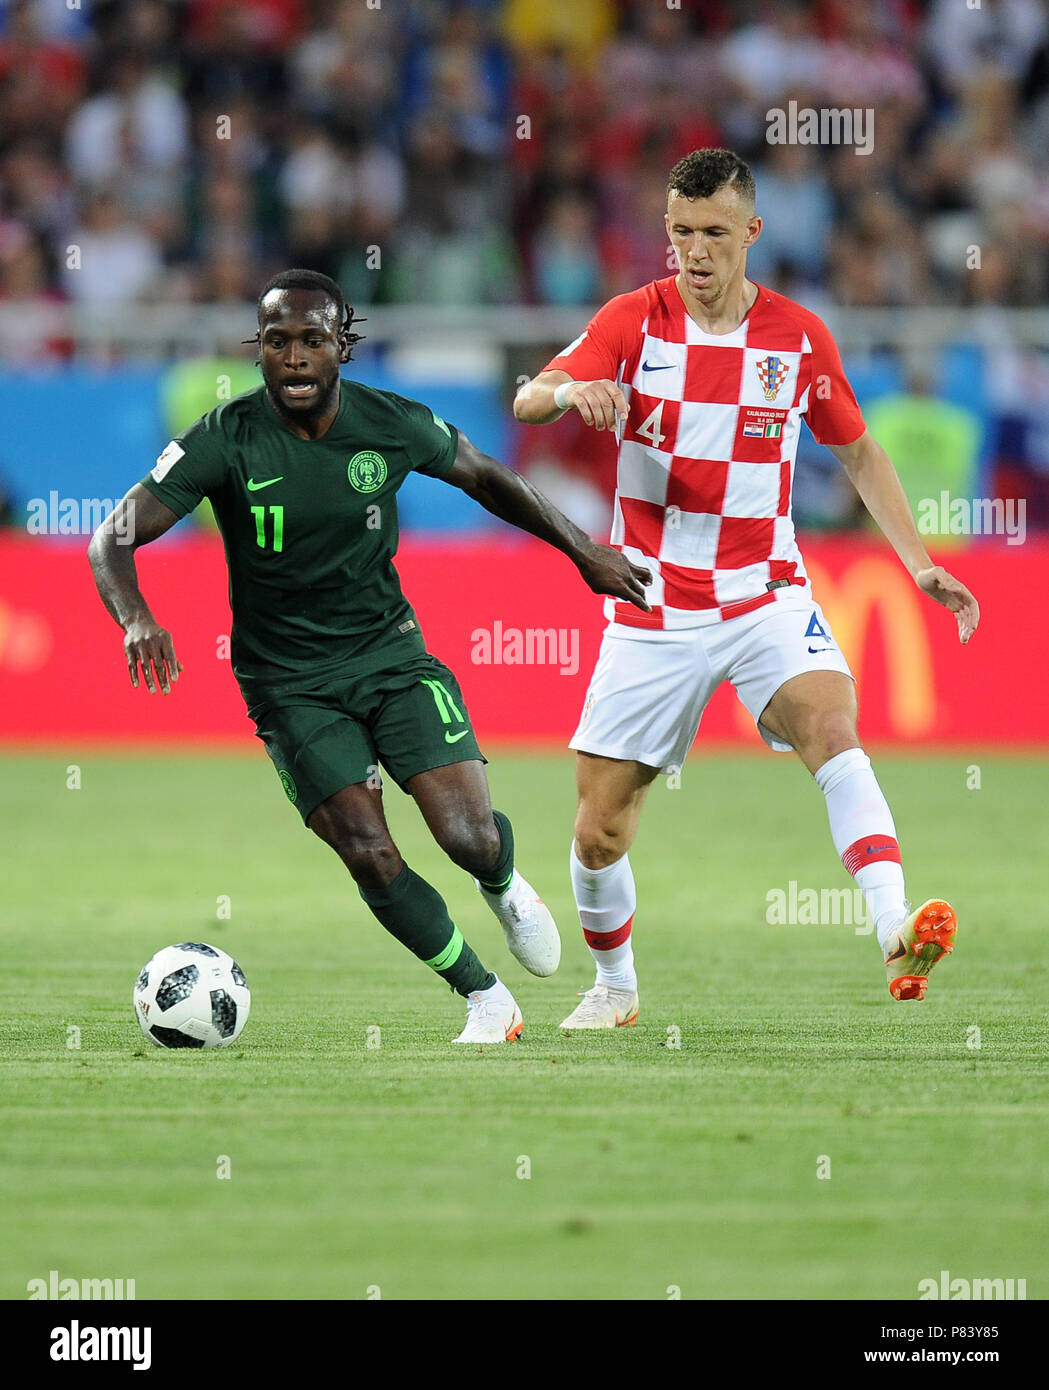 KALININGRAD, RUSSIA - JUNE 16: Ivan Perisic of Croatia competes with Victor Moses of Nigeria during the 2018 FIFA World Cup Russia group D match between Croatia and Nigeria at Kaliningrad Stadium on June 16, 2018 in Kaliningrad, Russia. (Photo by Norbert Barczyk/PressFocus/MB Media) Stock Photo